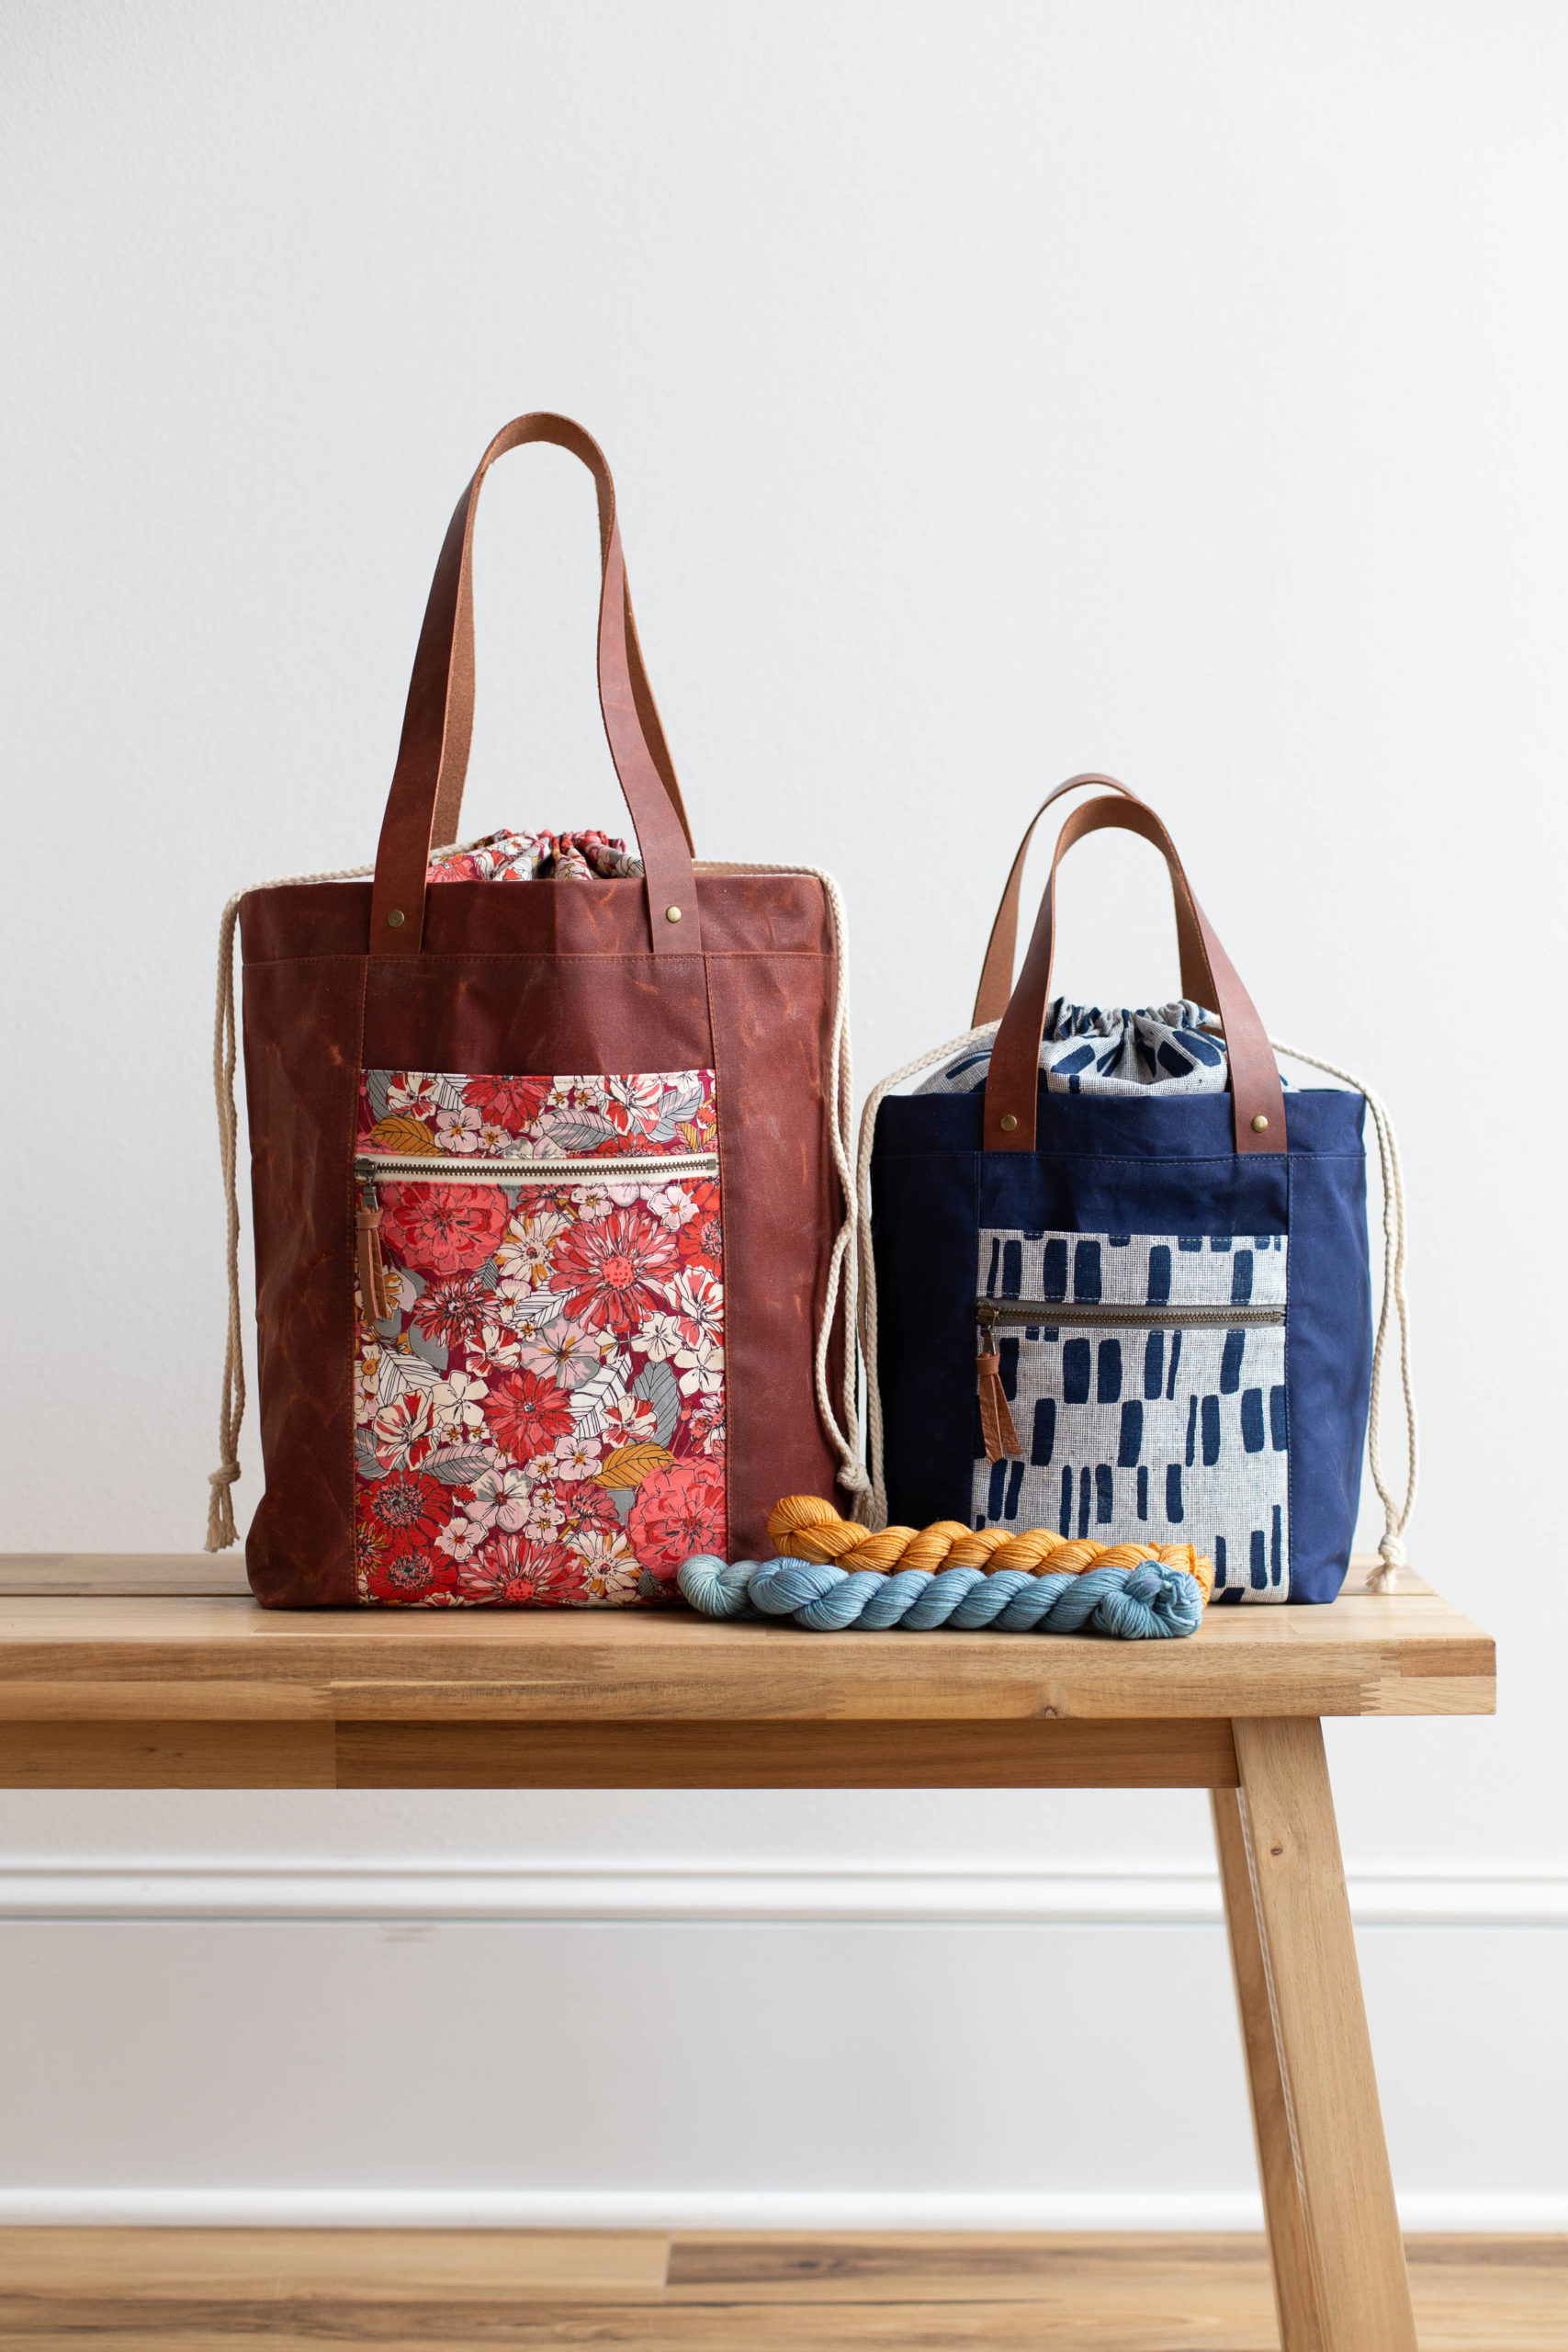 New! The Firefly Tote Pattern - Noodlehead